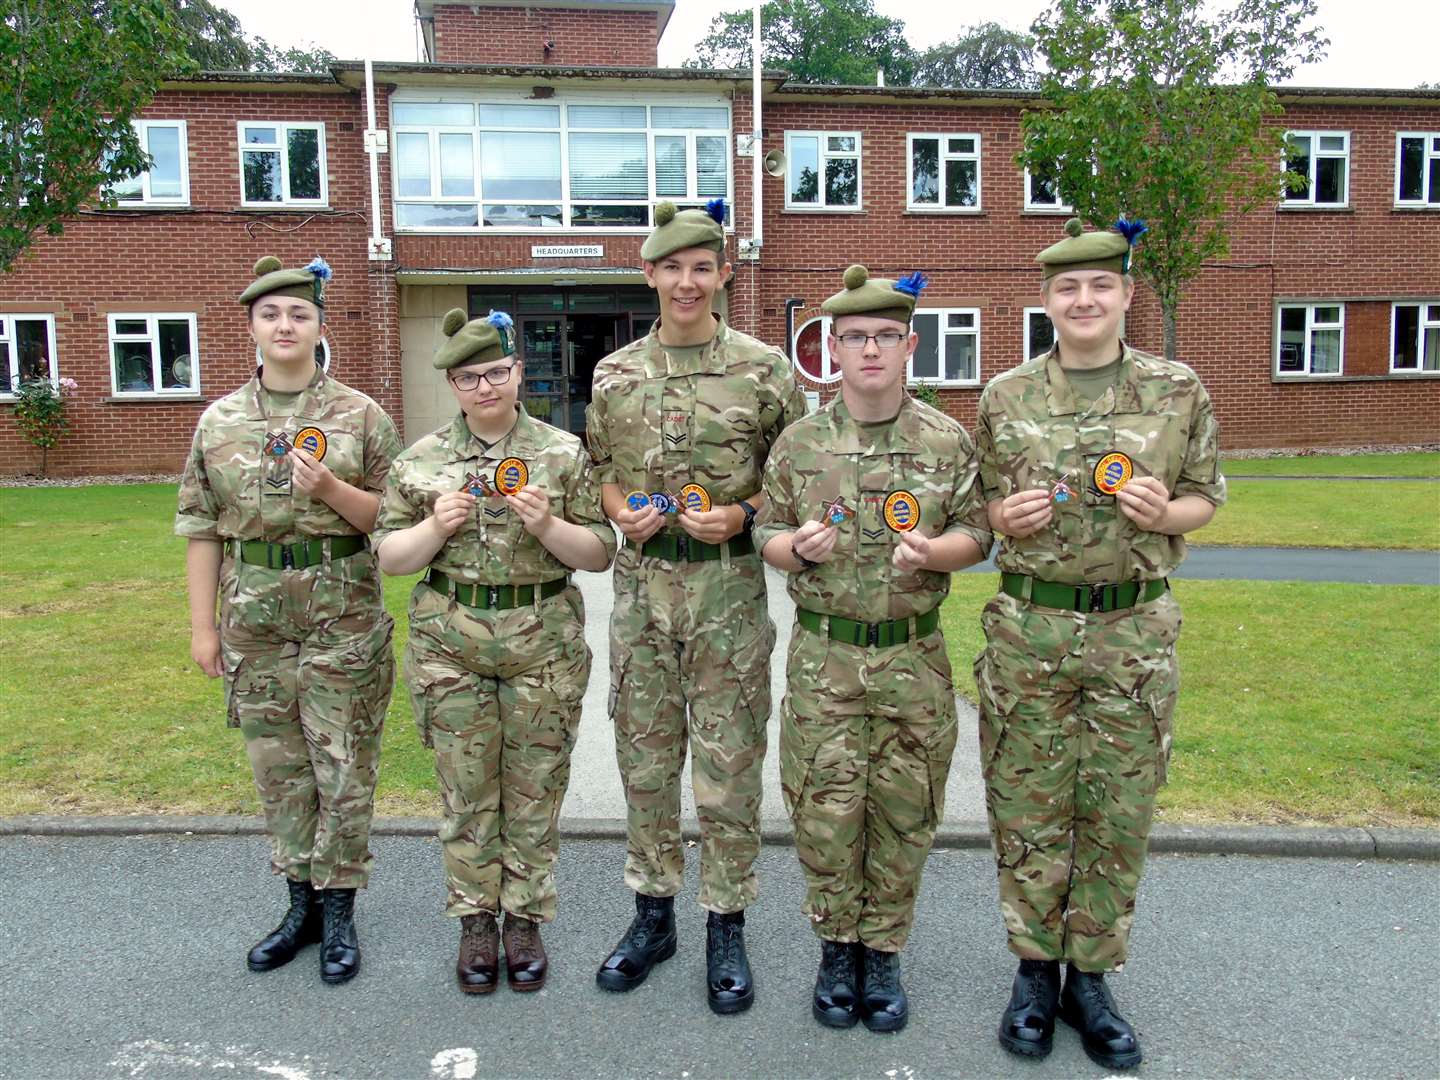 The Inter Service Cadet Rifle Team showing off their badges (from left) Cpl Goodman, Cpl Calder, Cpl Tait, Cpl Hayllar and Cpl Bialkowski.